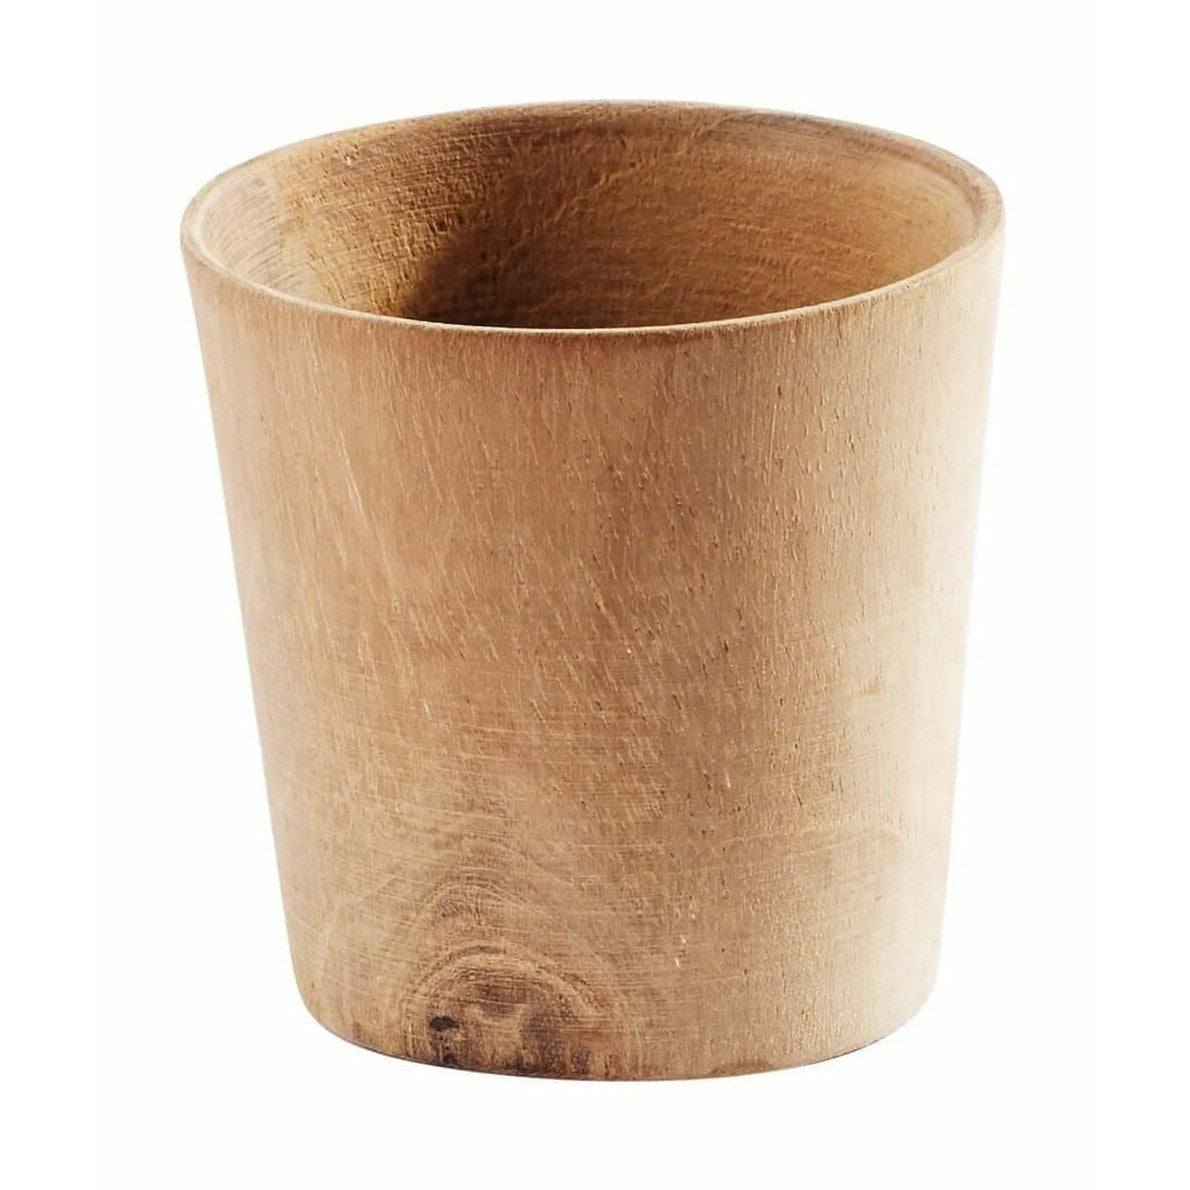 MUUBS CUP, Ø5cm